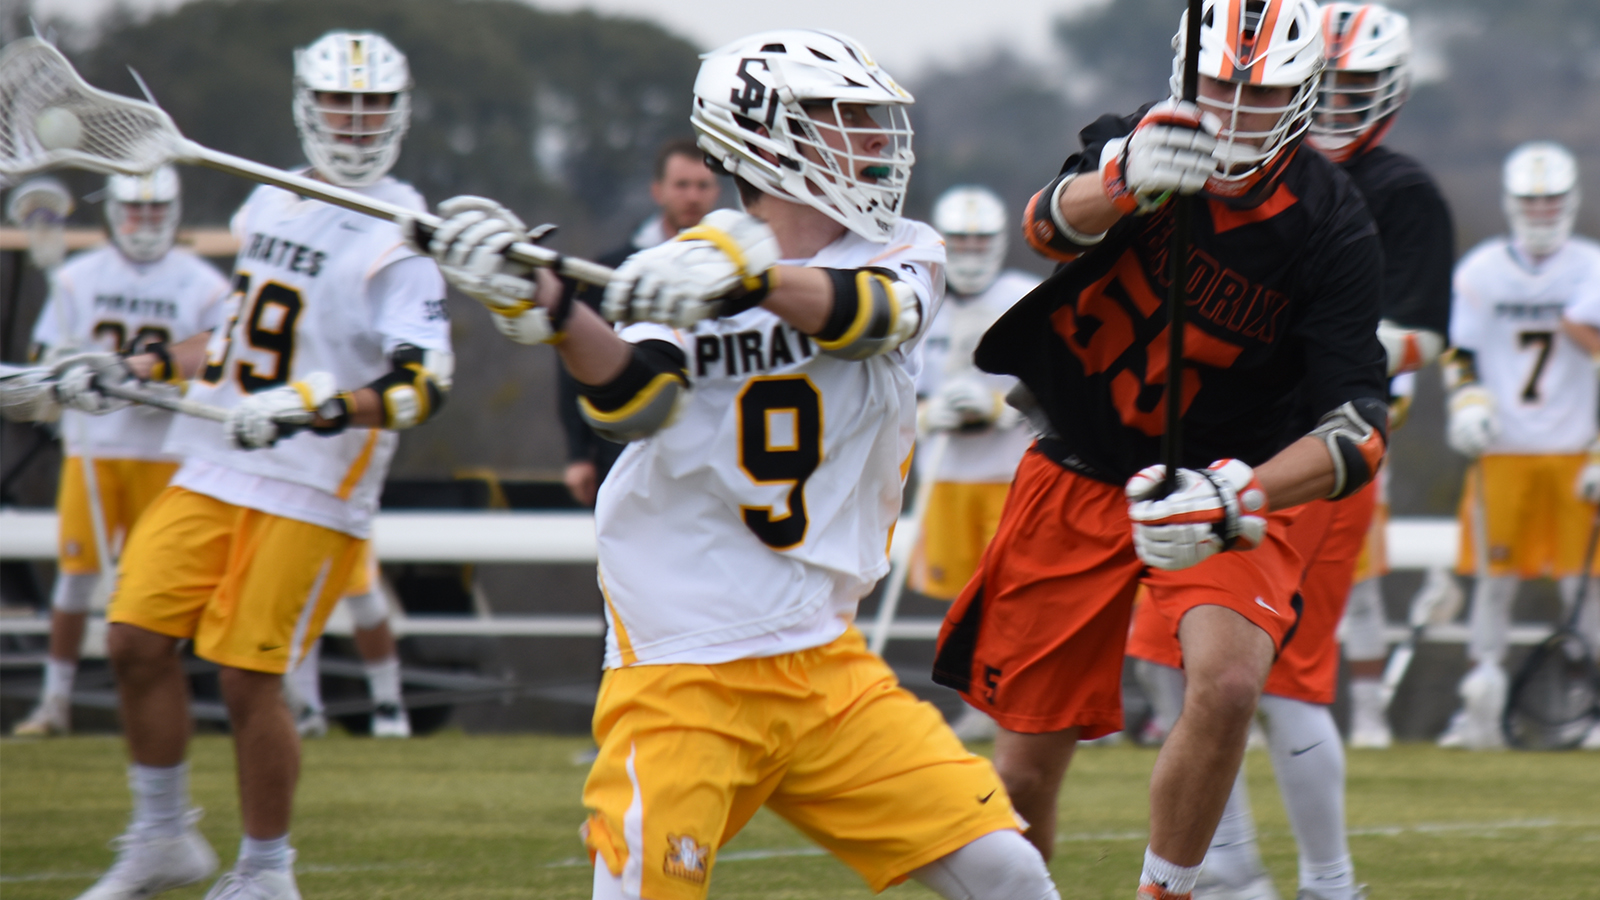 Pirates Can't Contain BSC Men in Offensive Duel